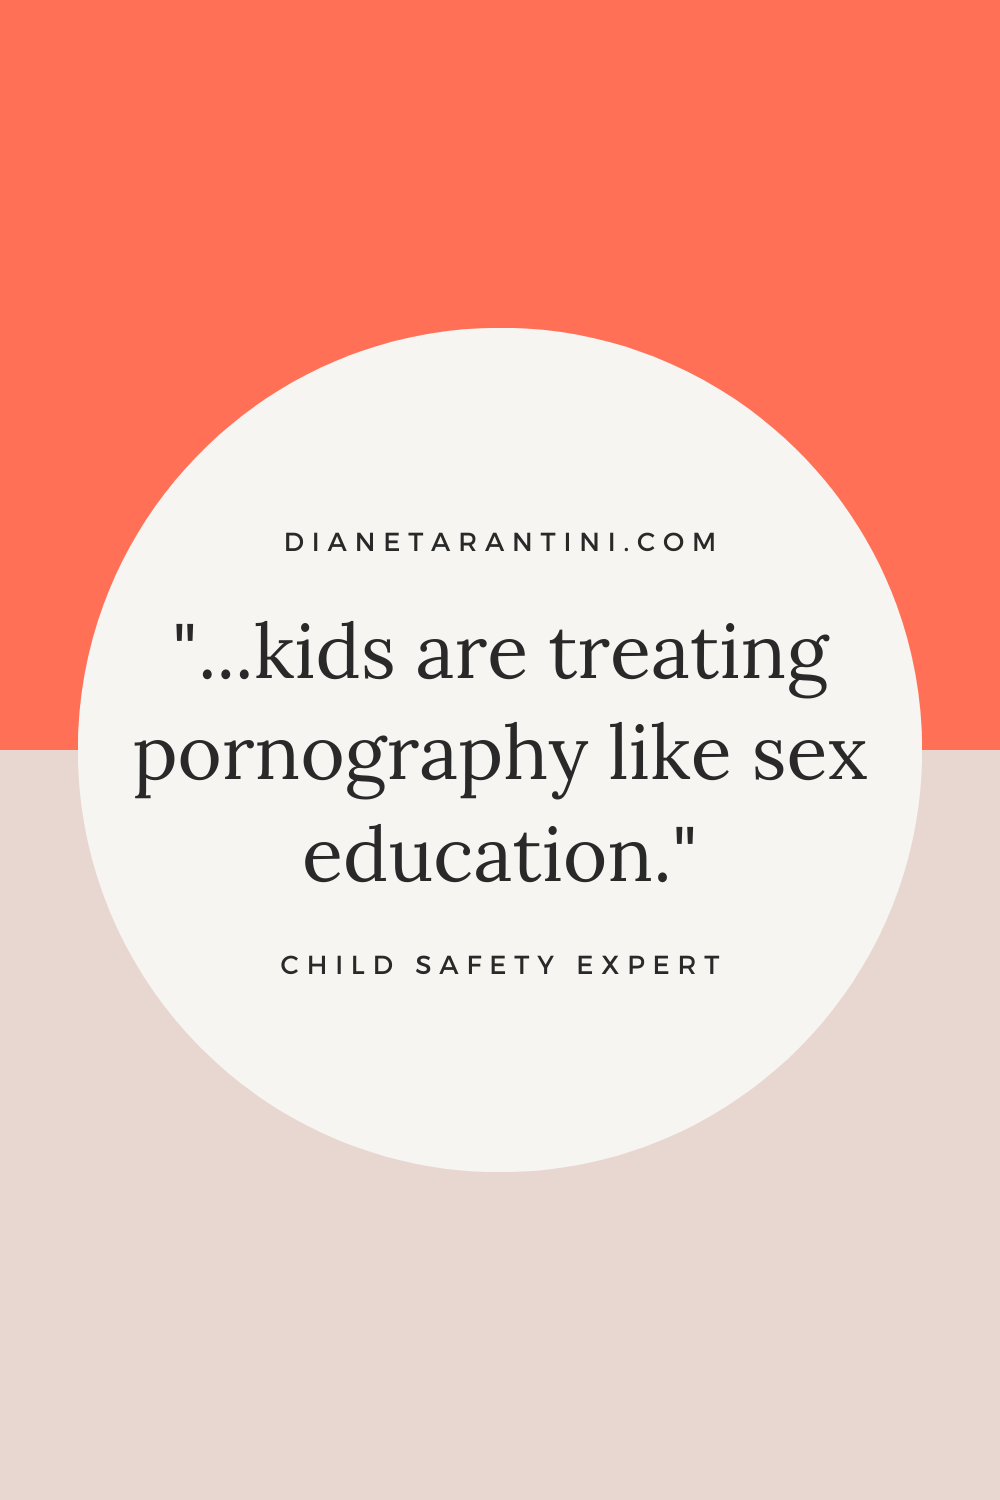 Why are kids looking for pornography